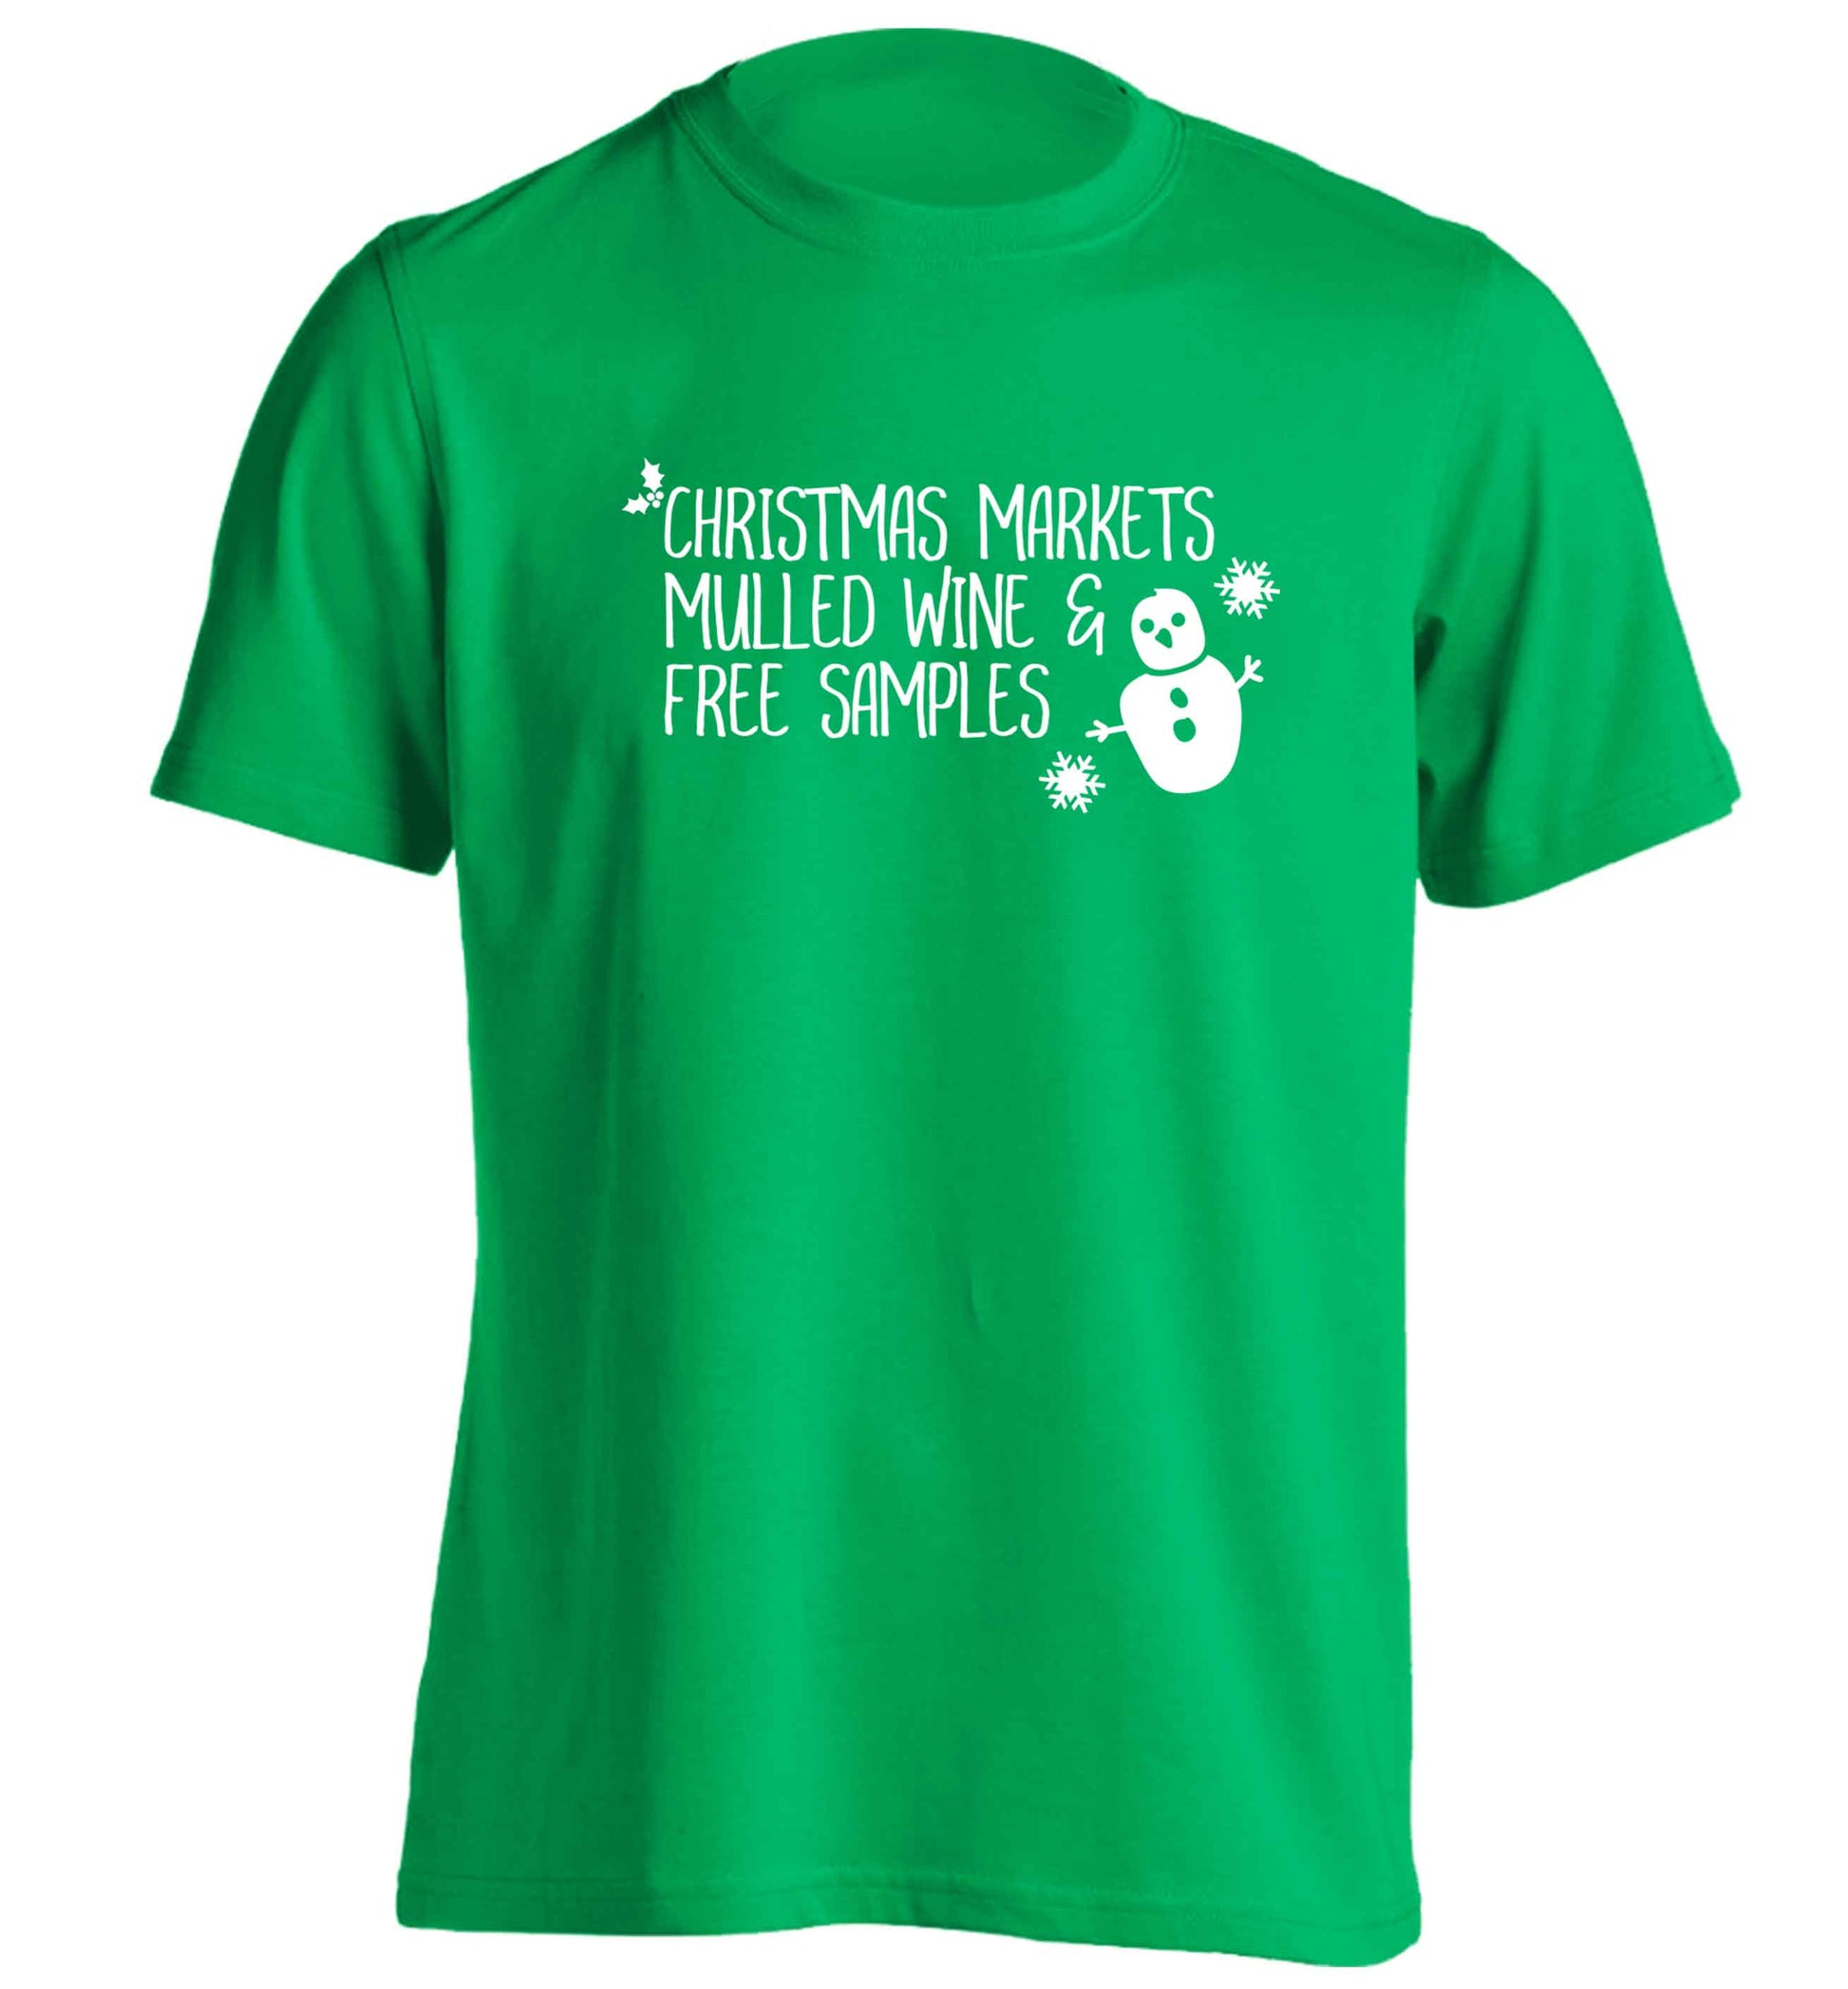 Christmas market mulled wine & free samples adults unisex green Tshirt 2XL